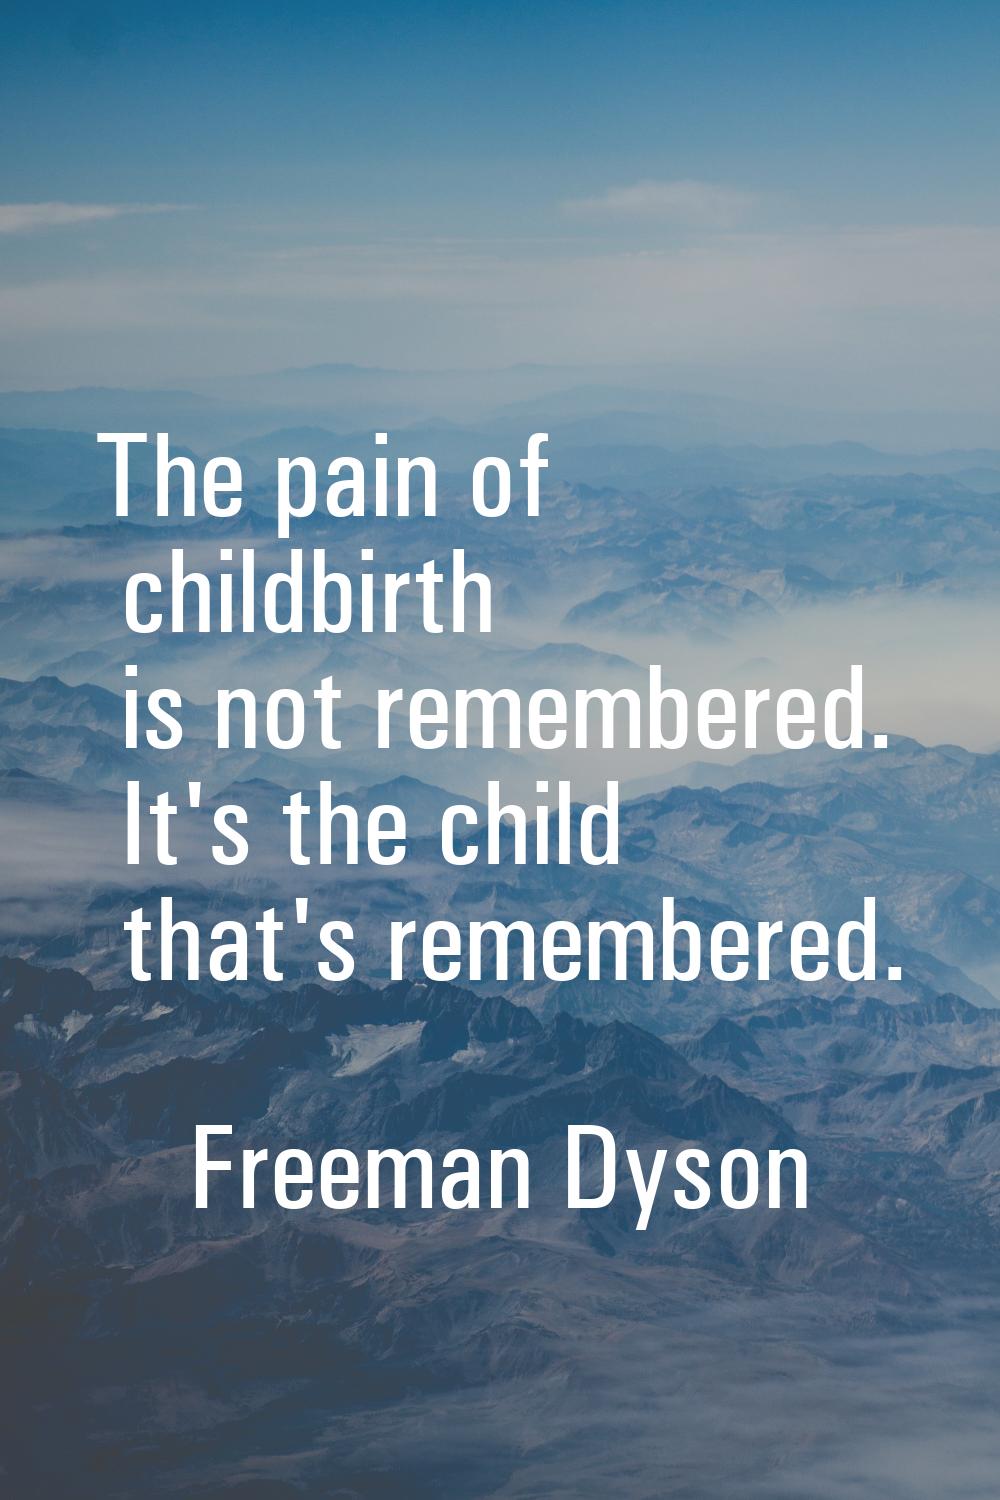 The pain of childbirth is not remembered. It's the child that's remembered.